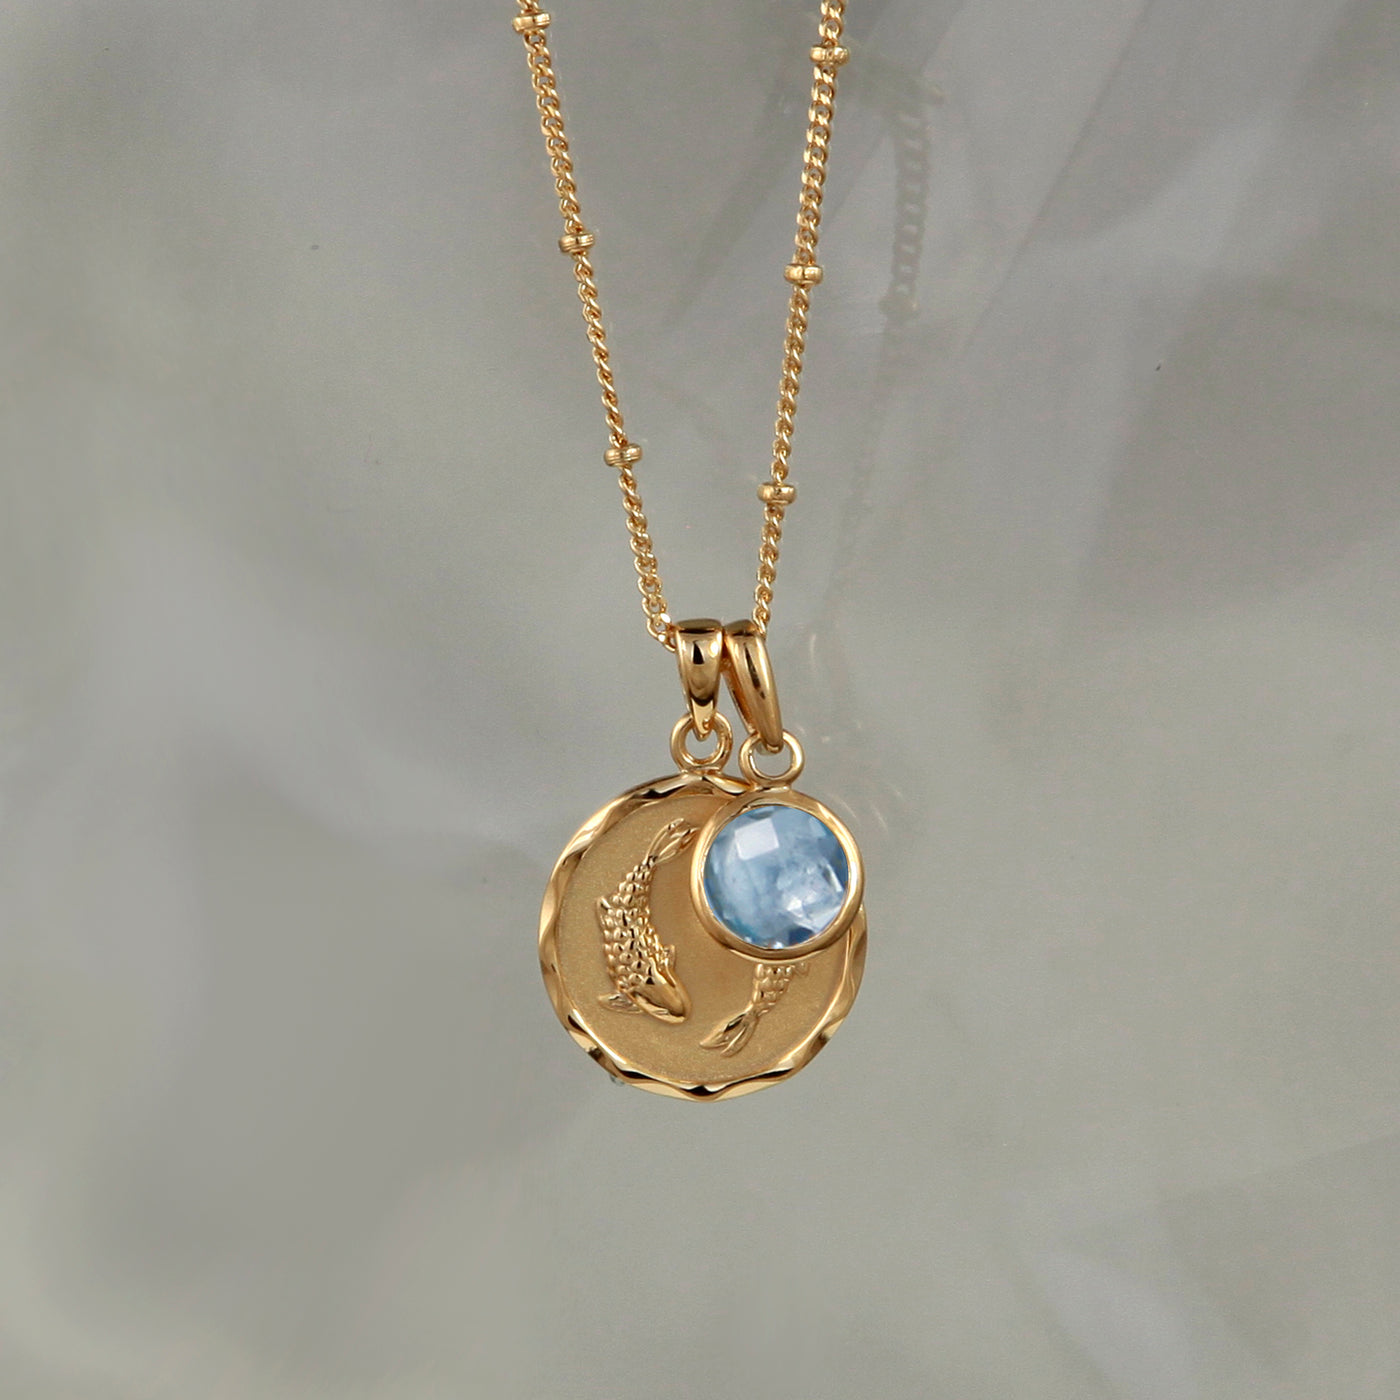 Gold Zodiac Necklace- Pisces with Birthstone